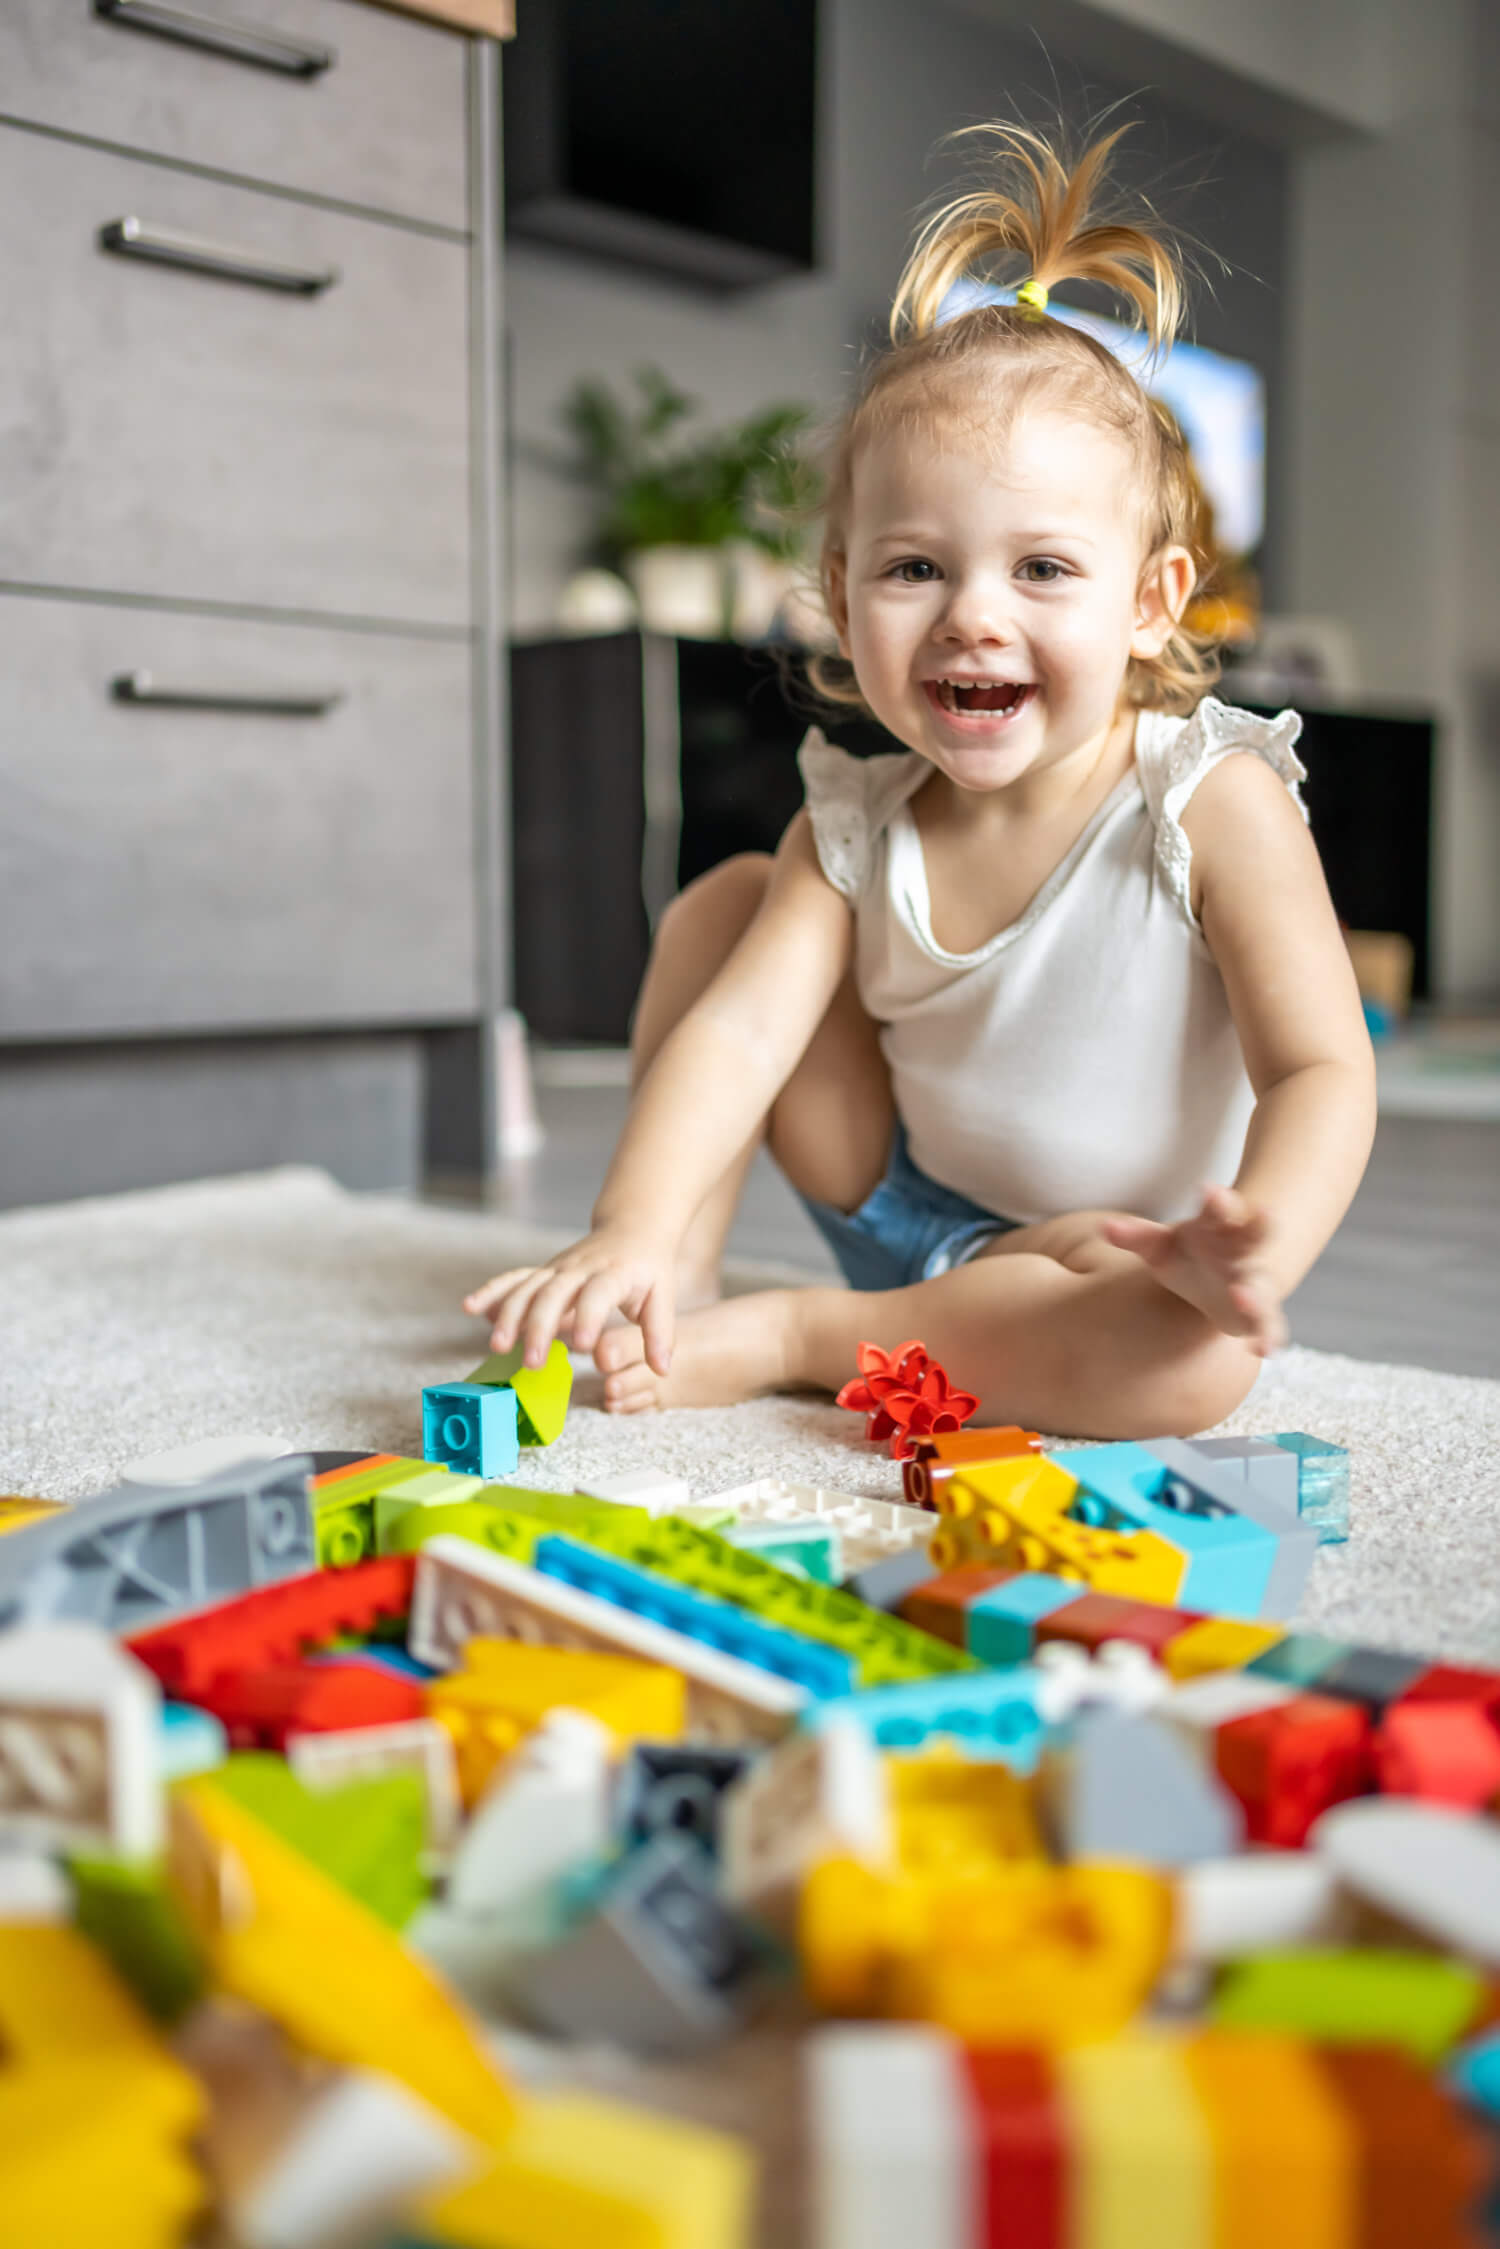 A smiling toddler with a ponytail sits on a carpet indoors, playing with colorful building blocks spread out in front of them.